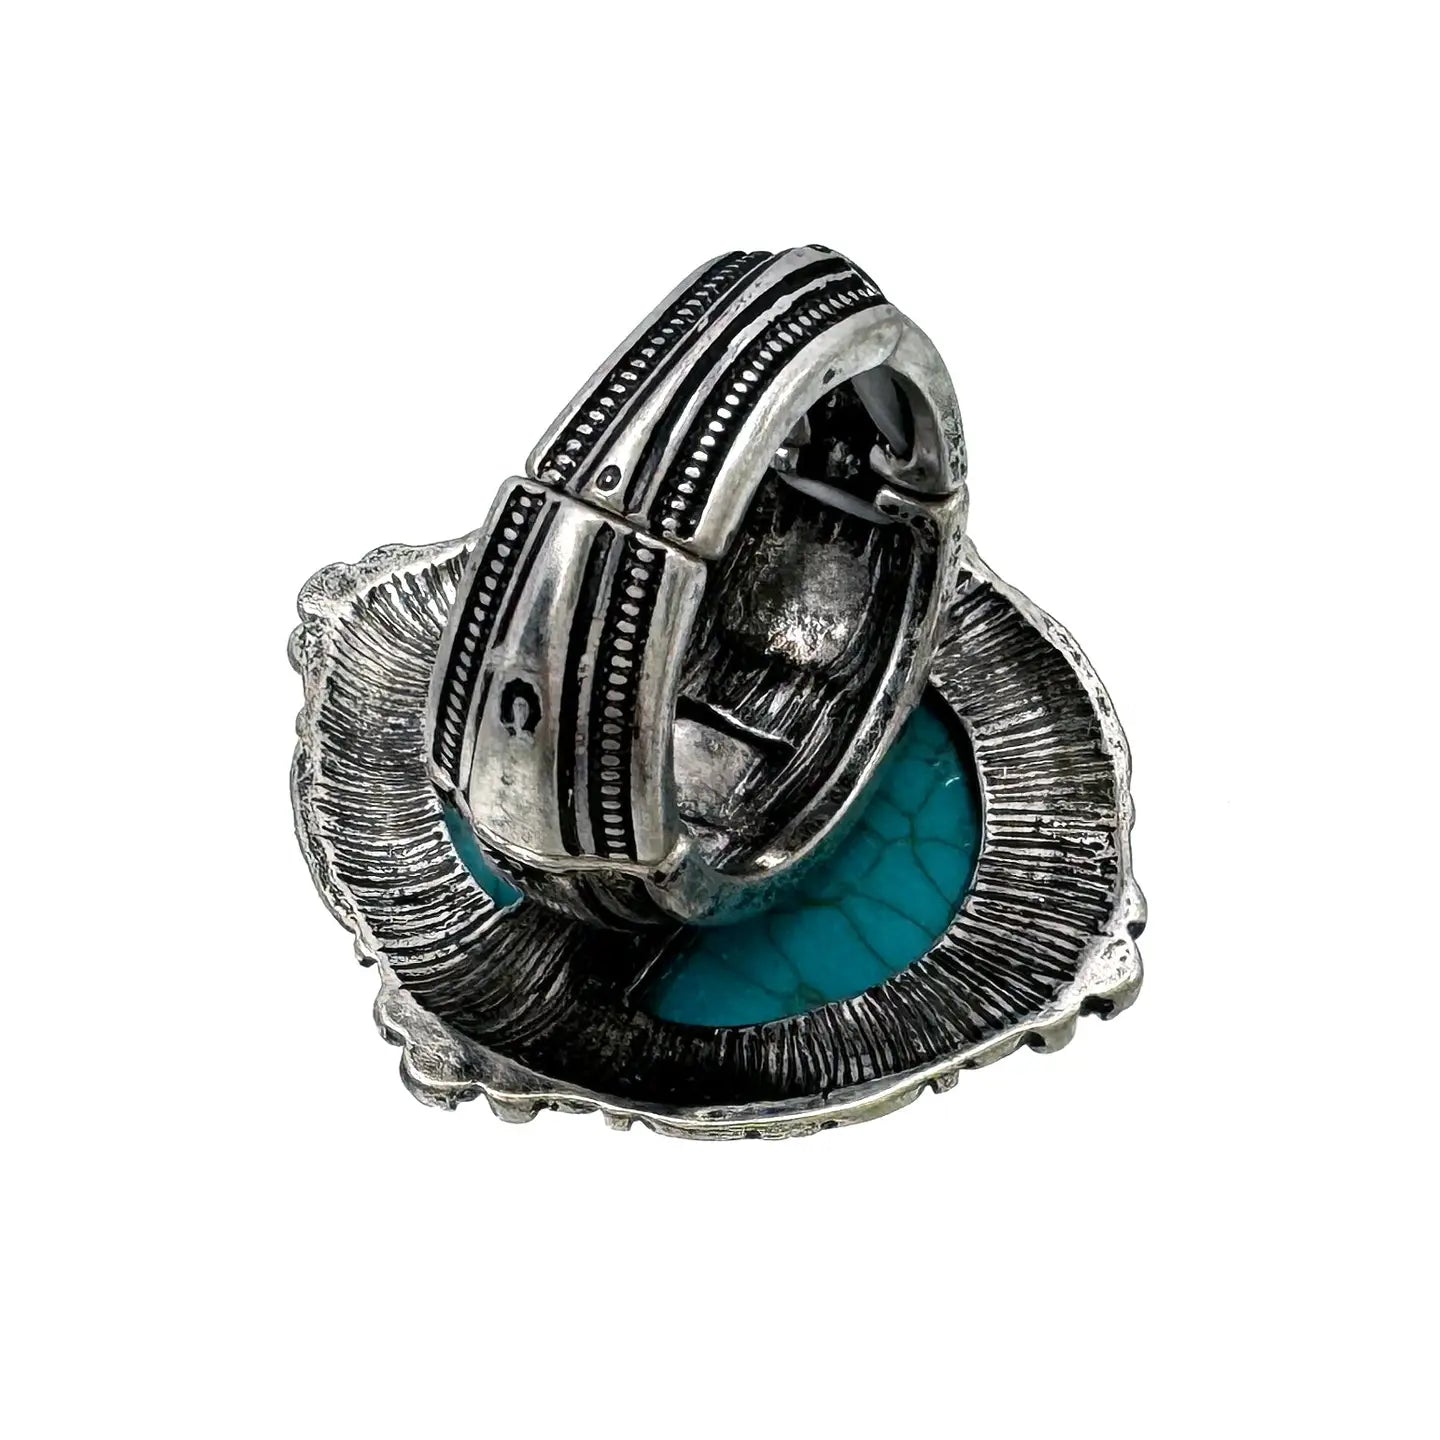 Teardrop Shape Turquoise Large Stretch Ring